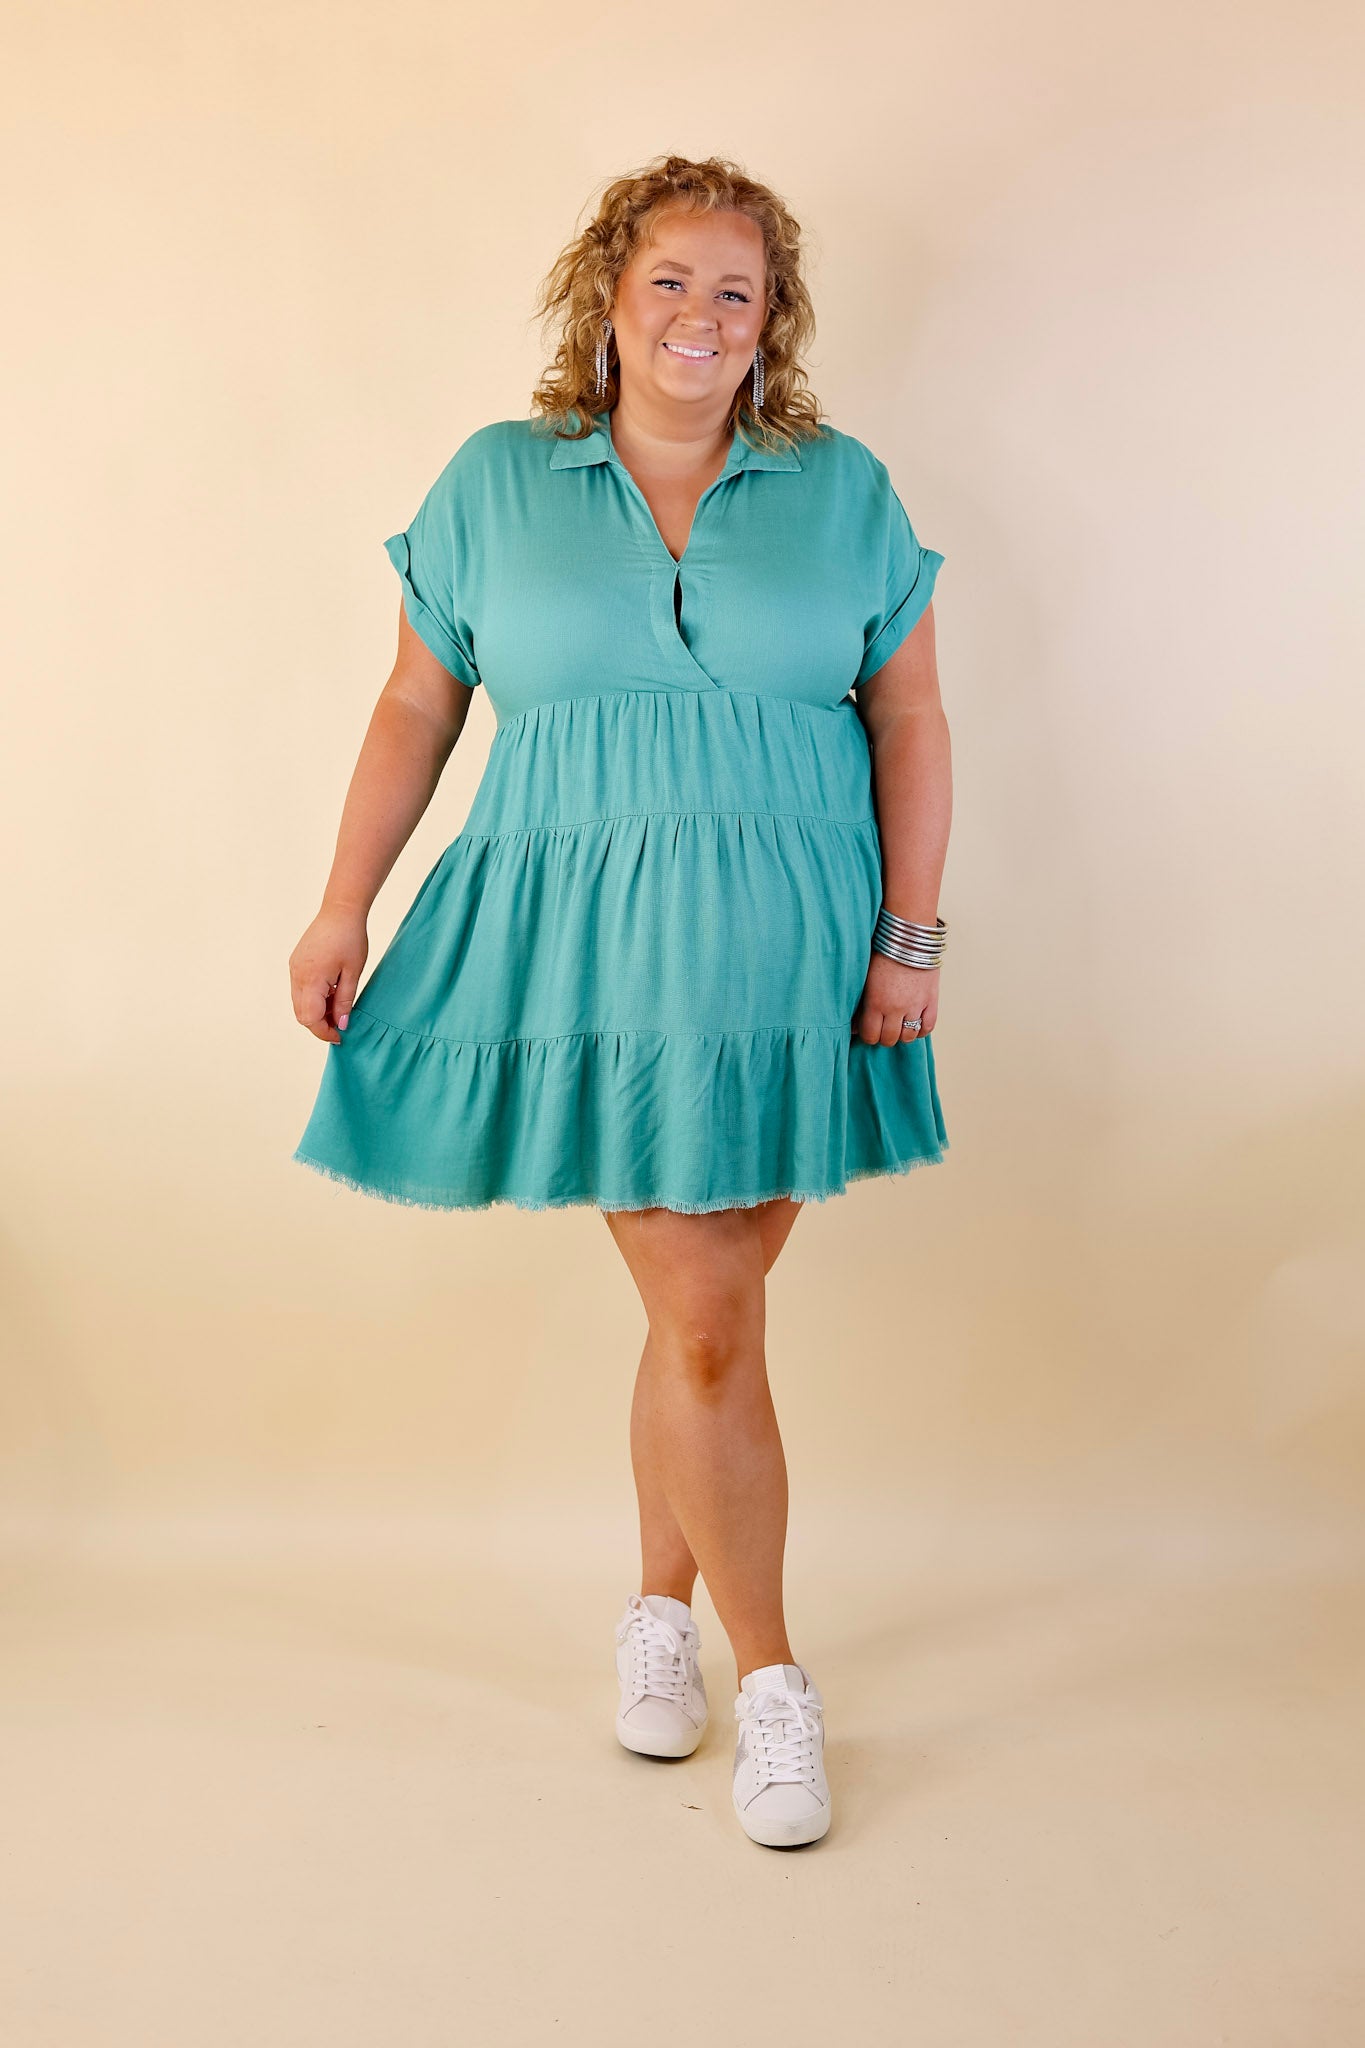 Taos Transitions Ruffle Tiered Collared Dress with Frayed Hem in Turquoise - Giddy Up Glamour Boutique